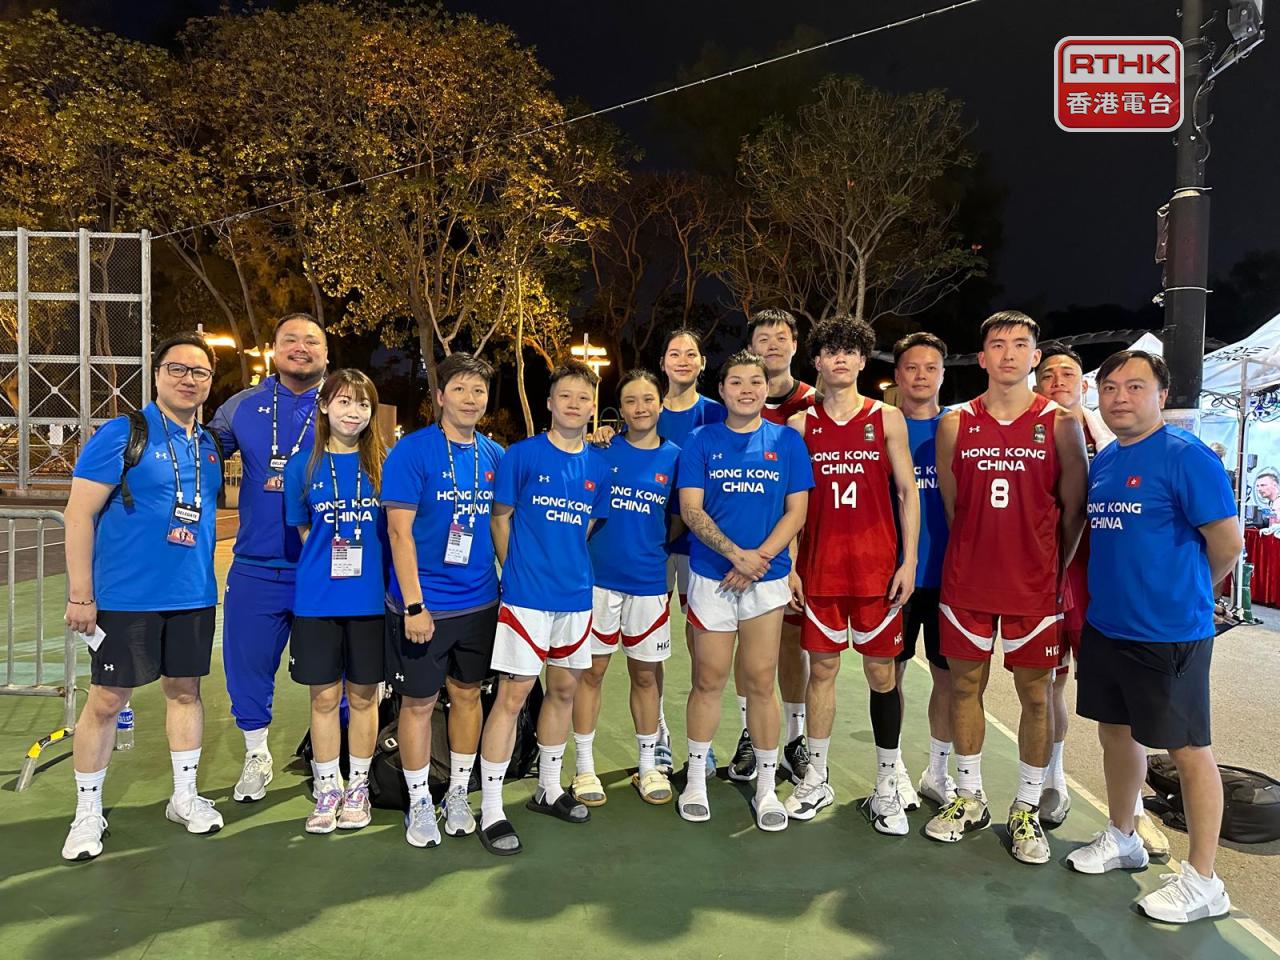 HK teams defeated on day 1 of 3x3 basketball